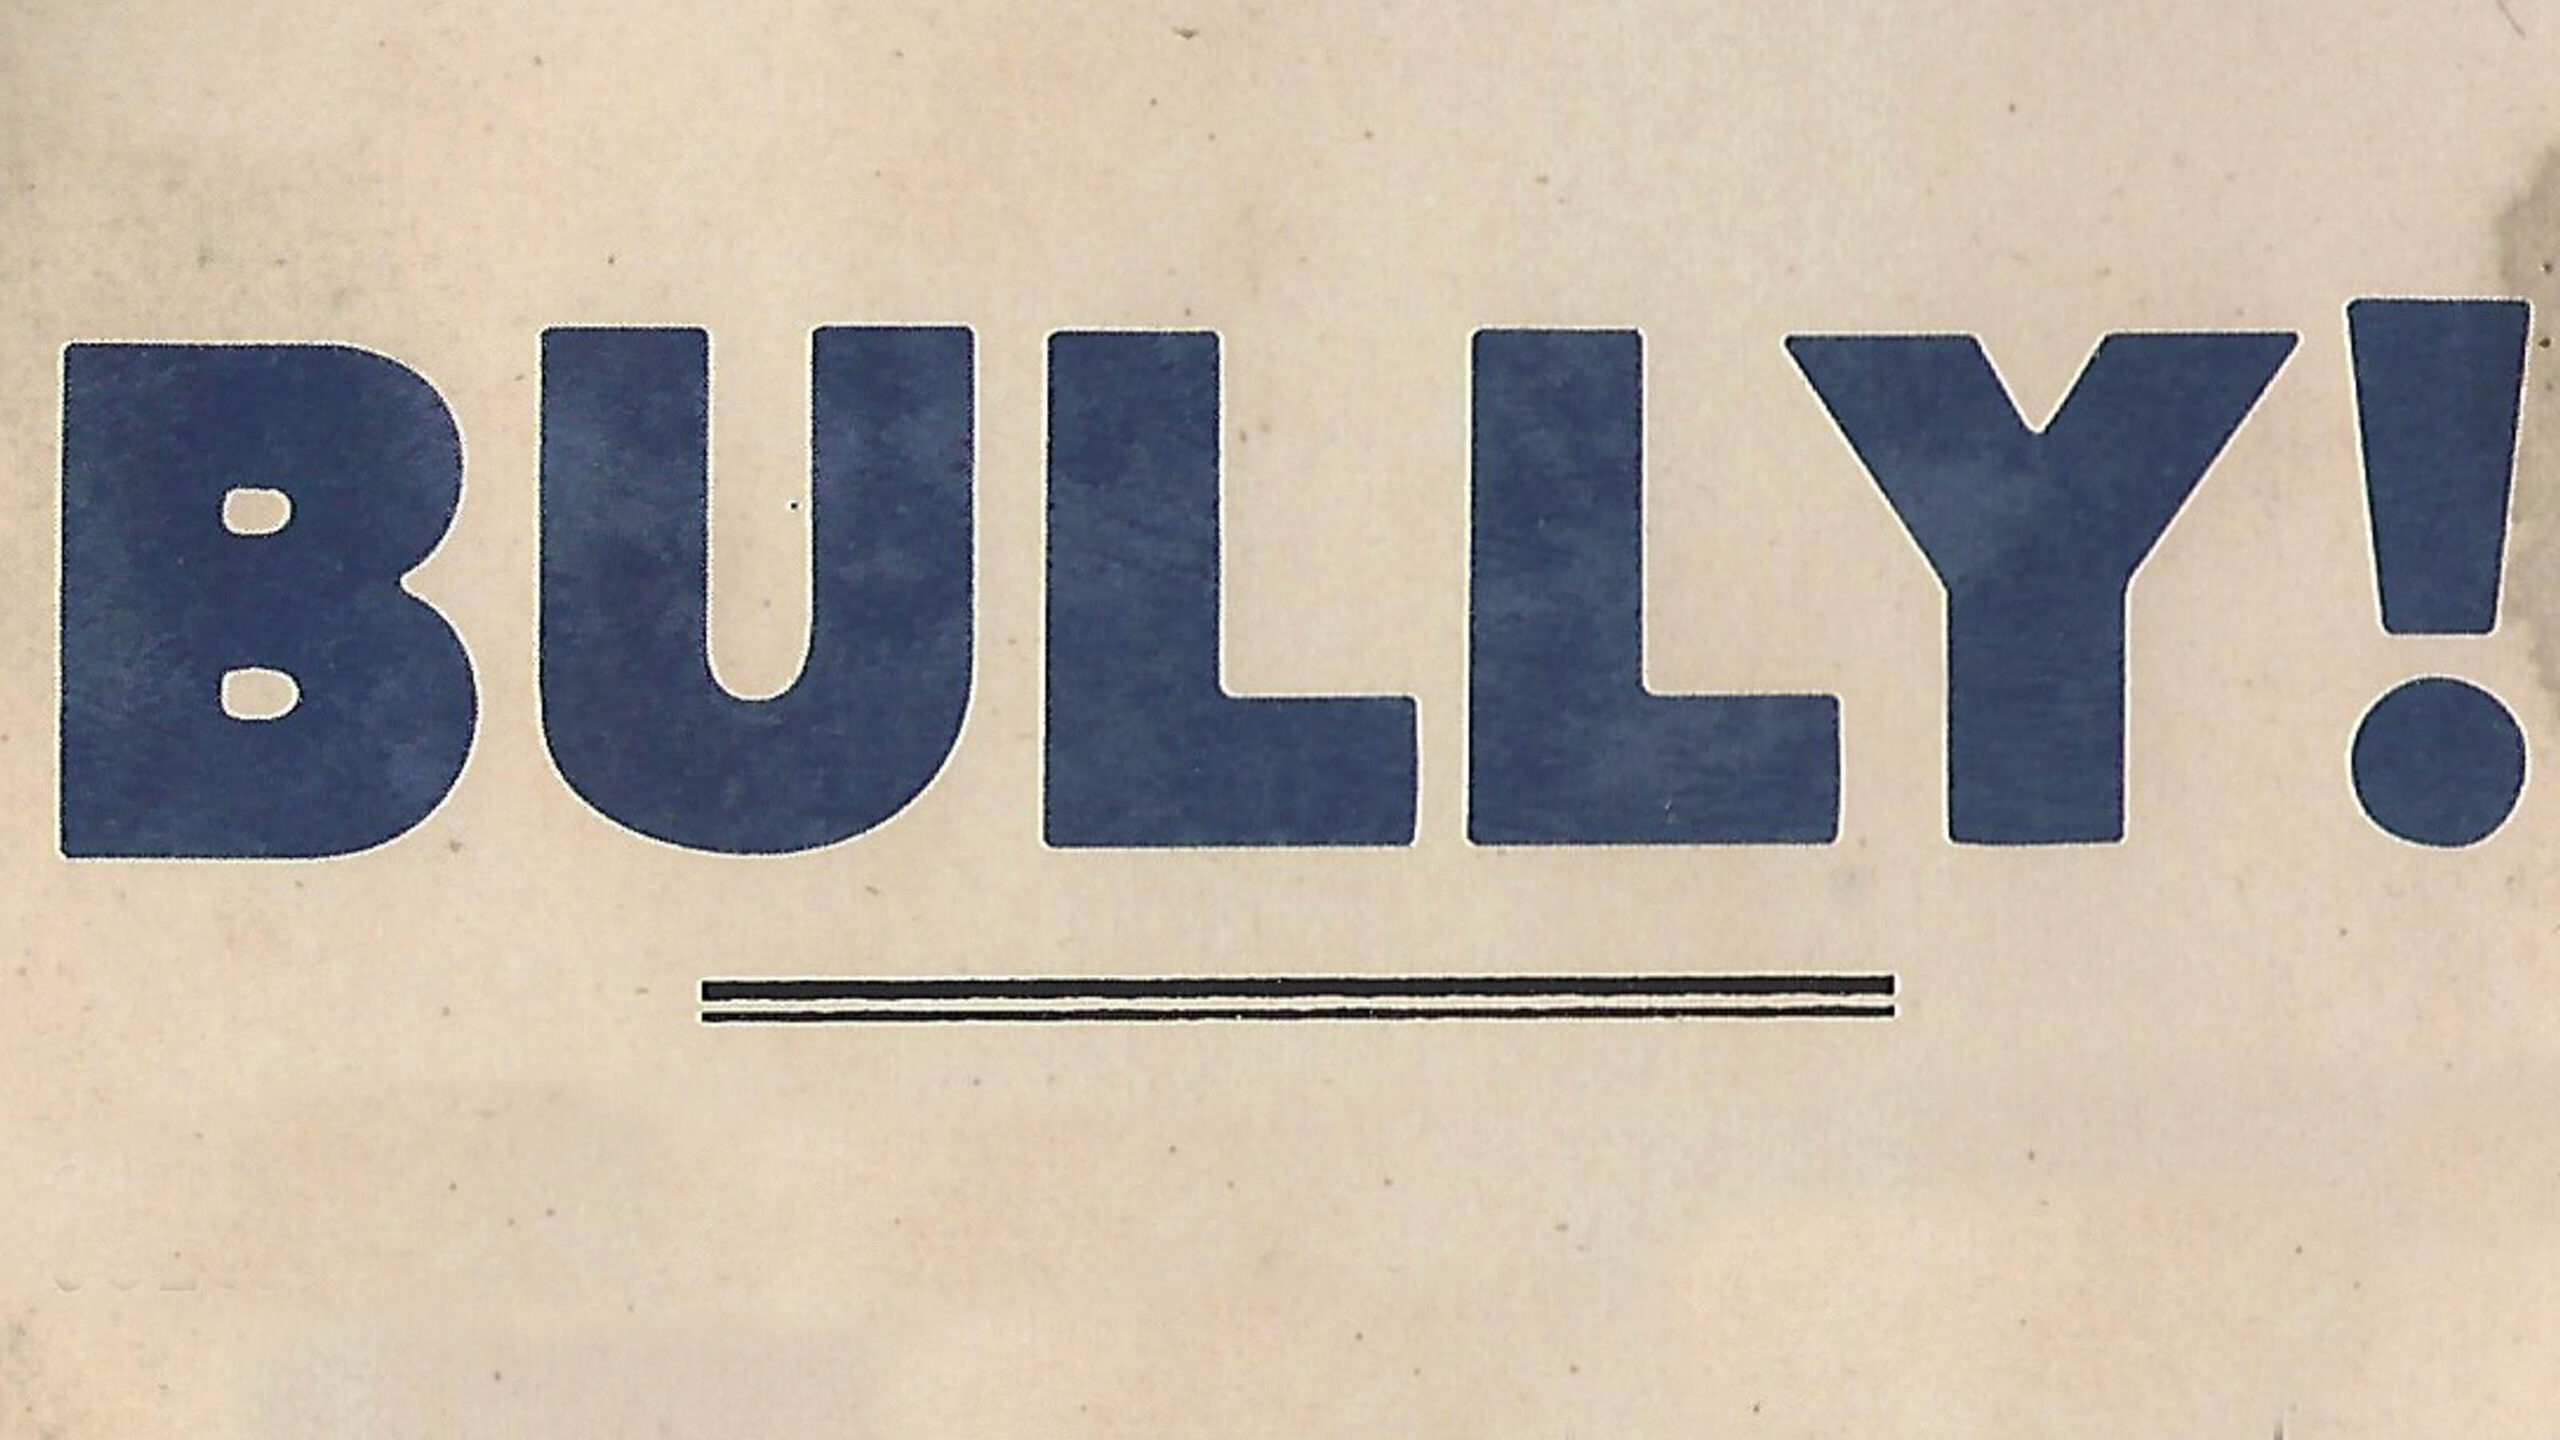 Bully! the cover of the book